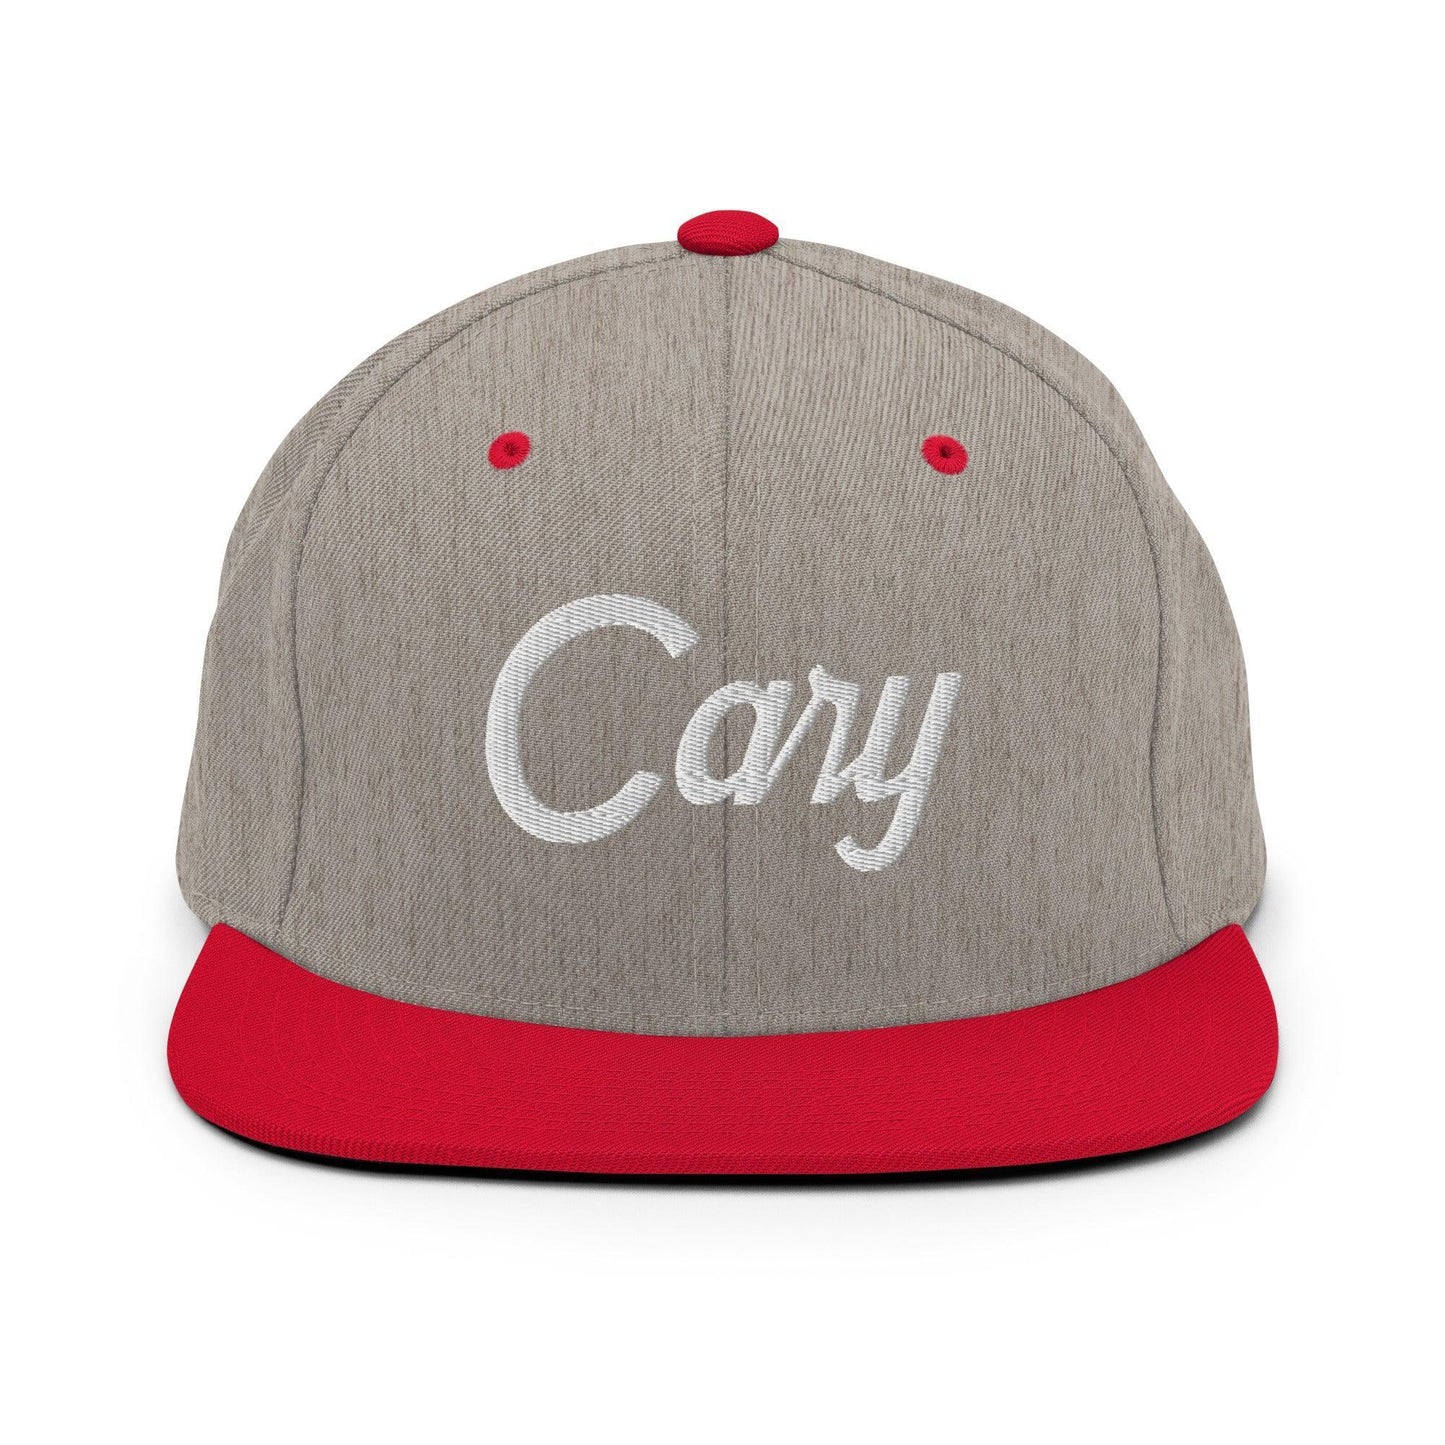 Cary Script Snapback Hat Heather Grey/ Red